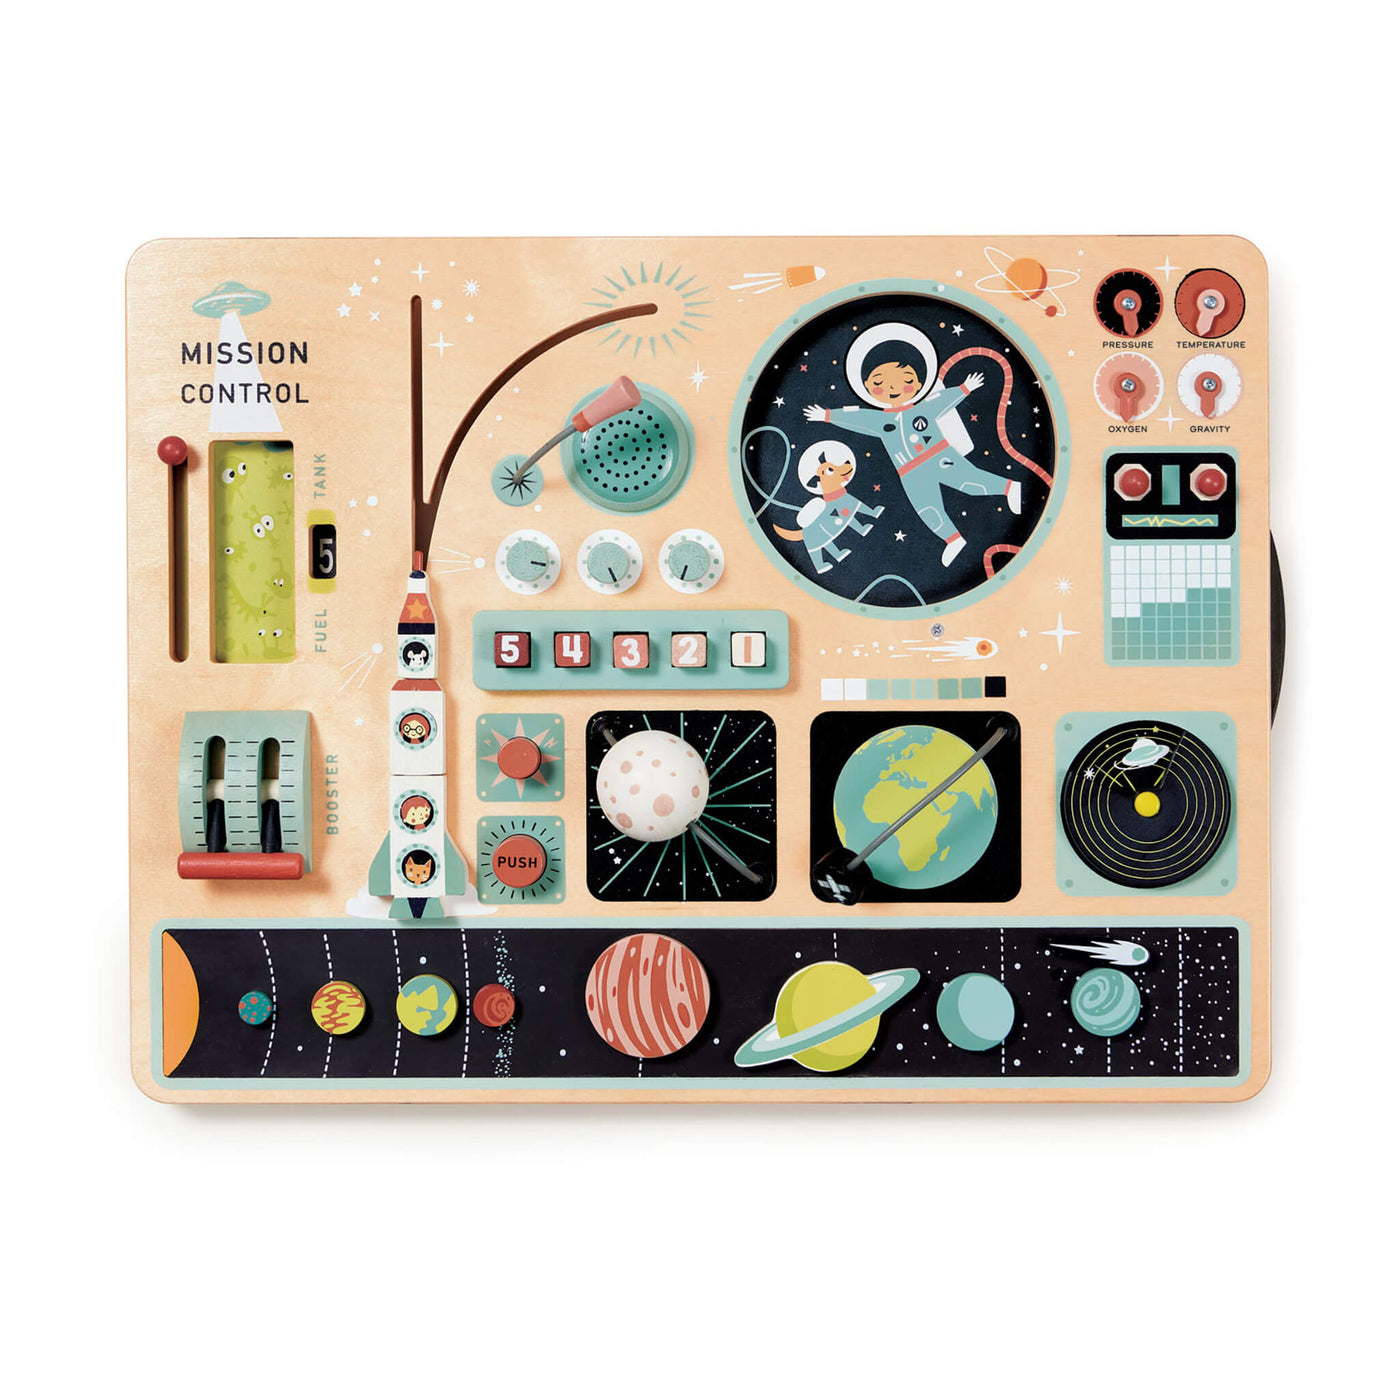 Tender Leaf Toys Space Station Activity Board,